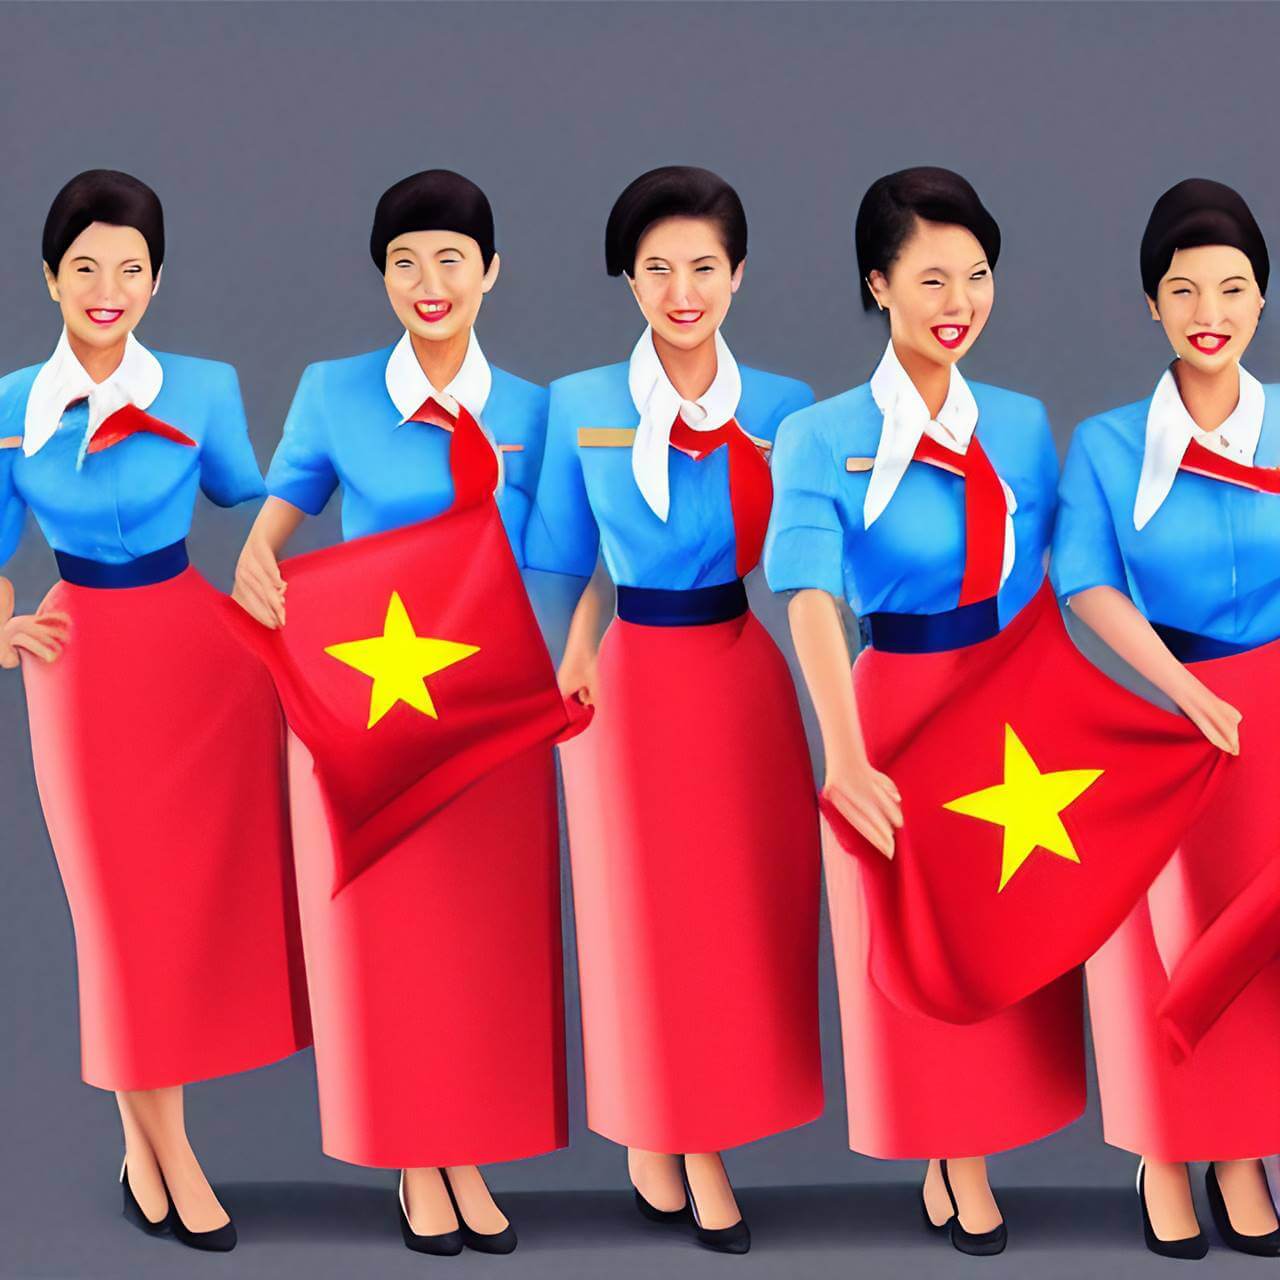 How to become a cabin crew in China